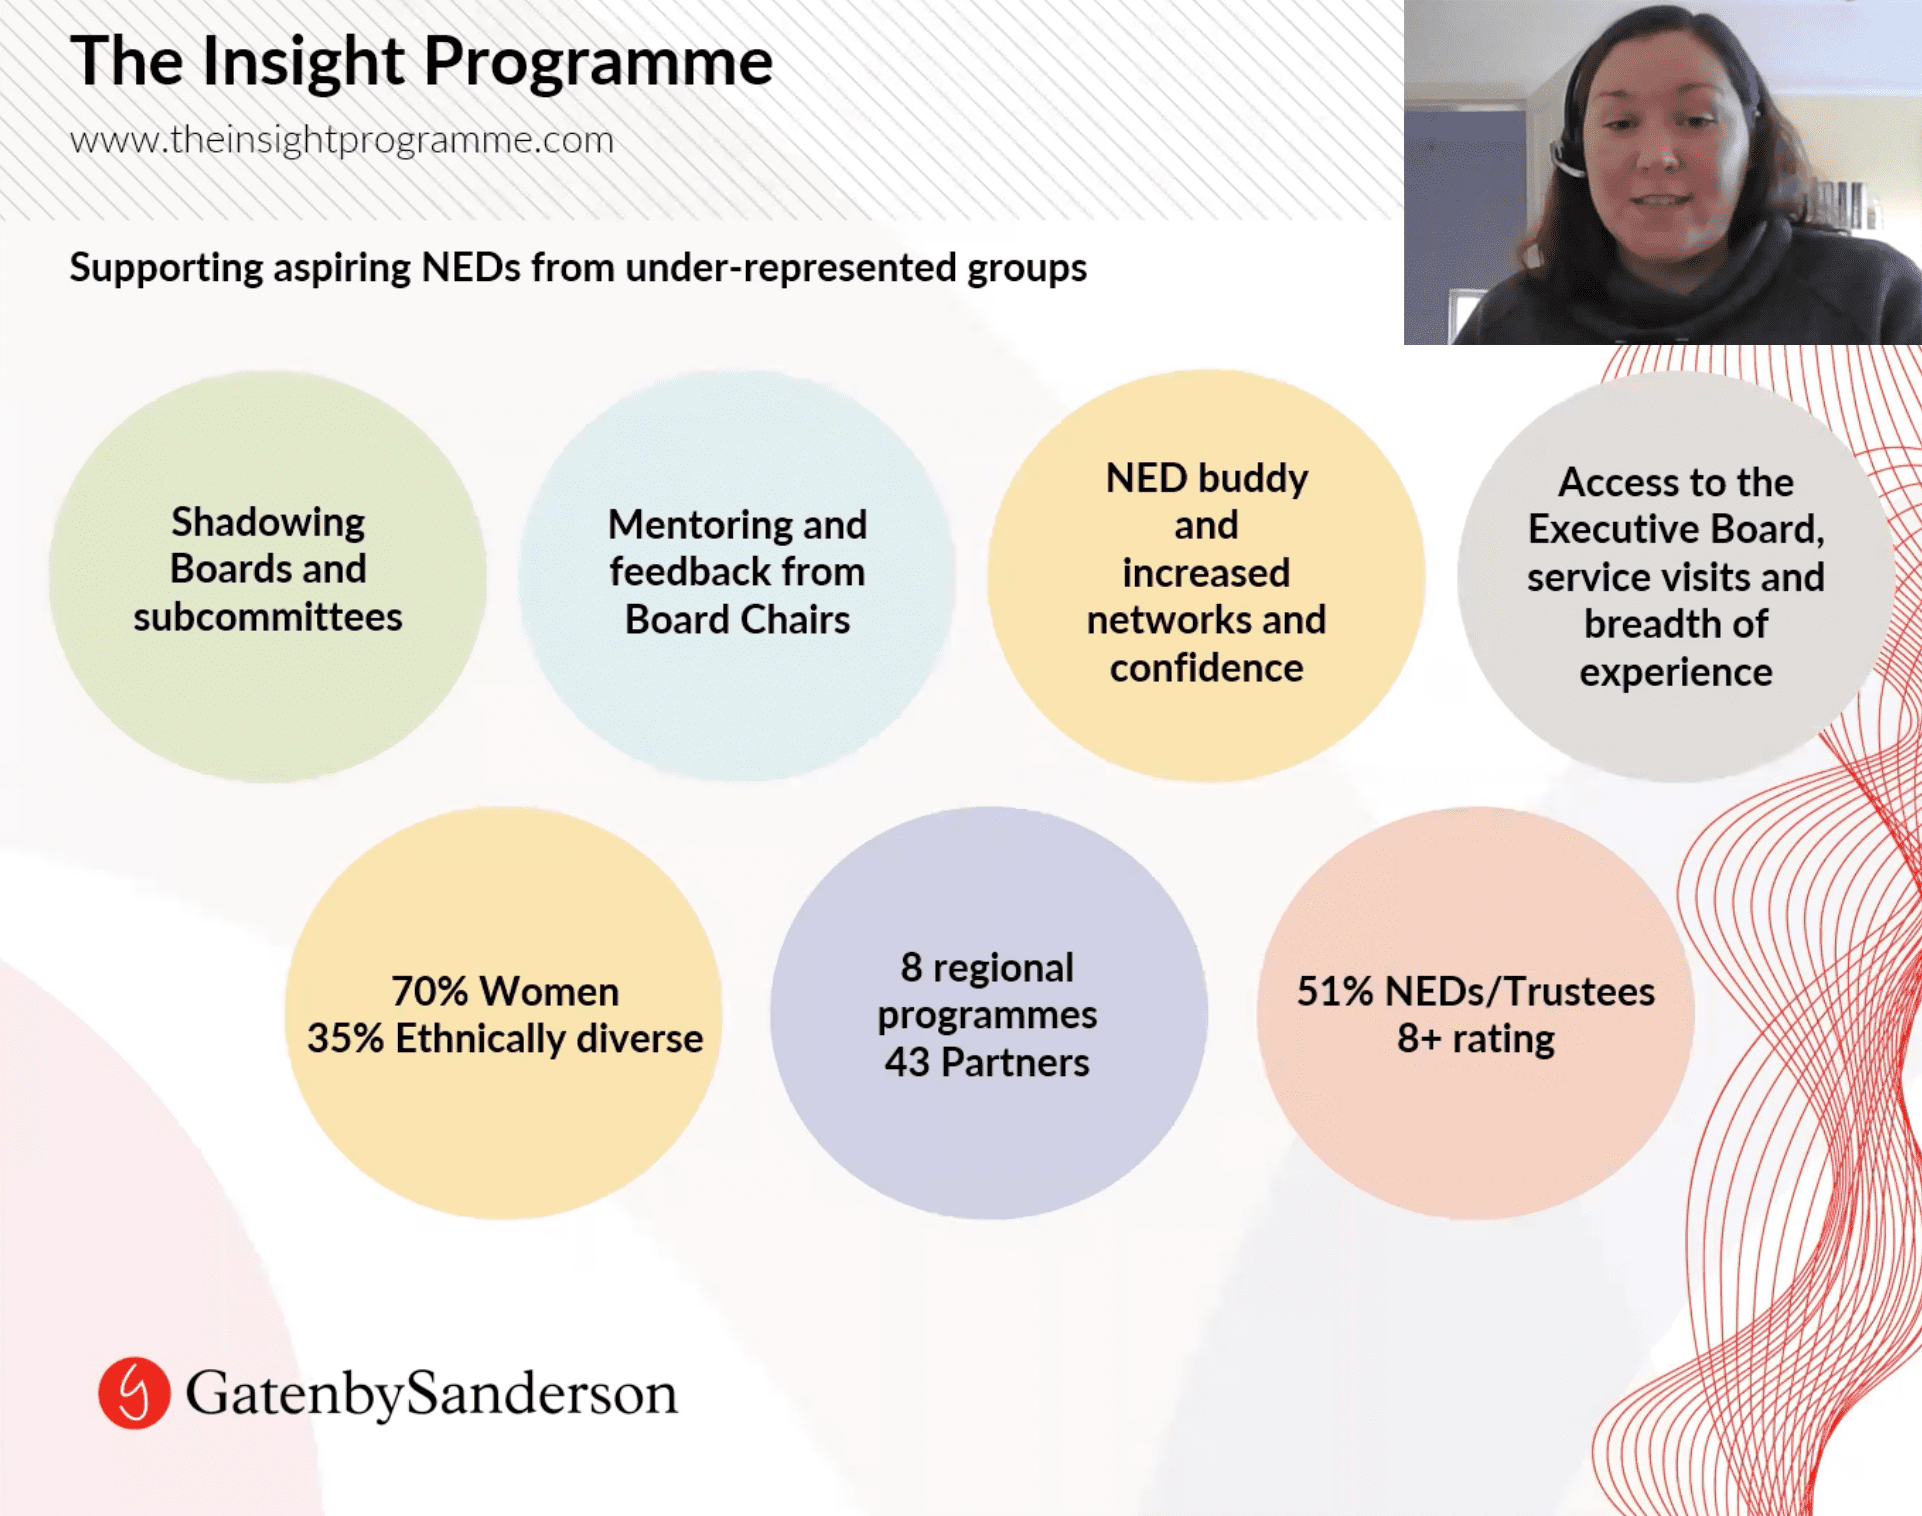 The Insight Programme